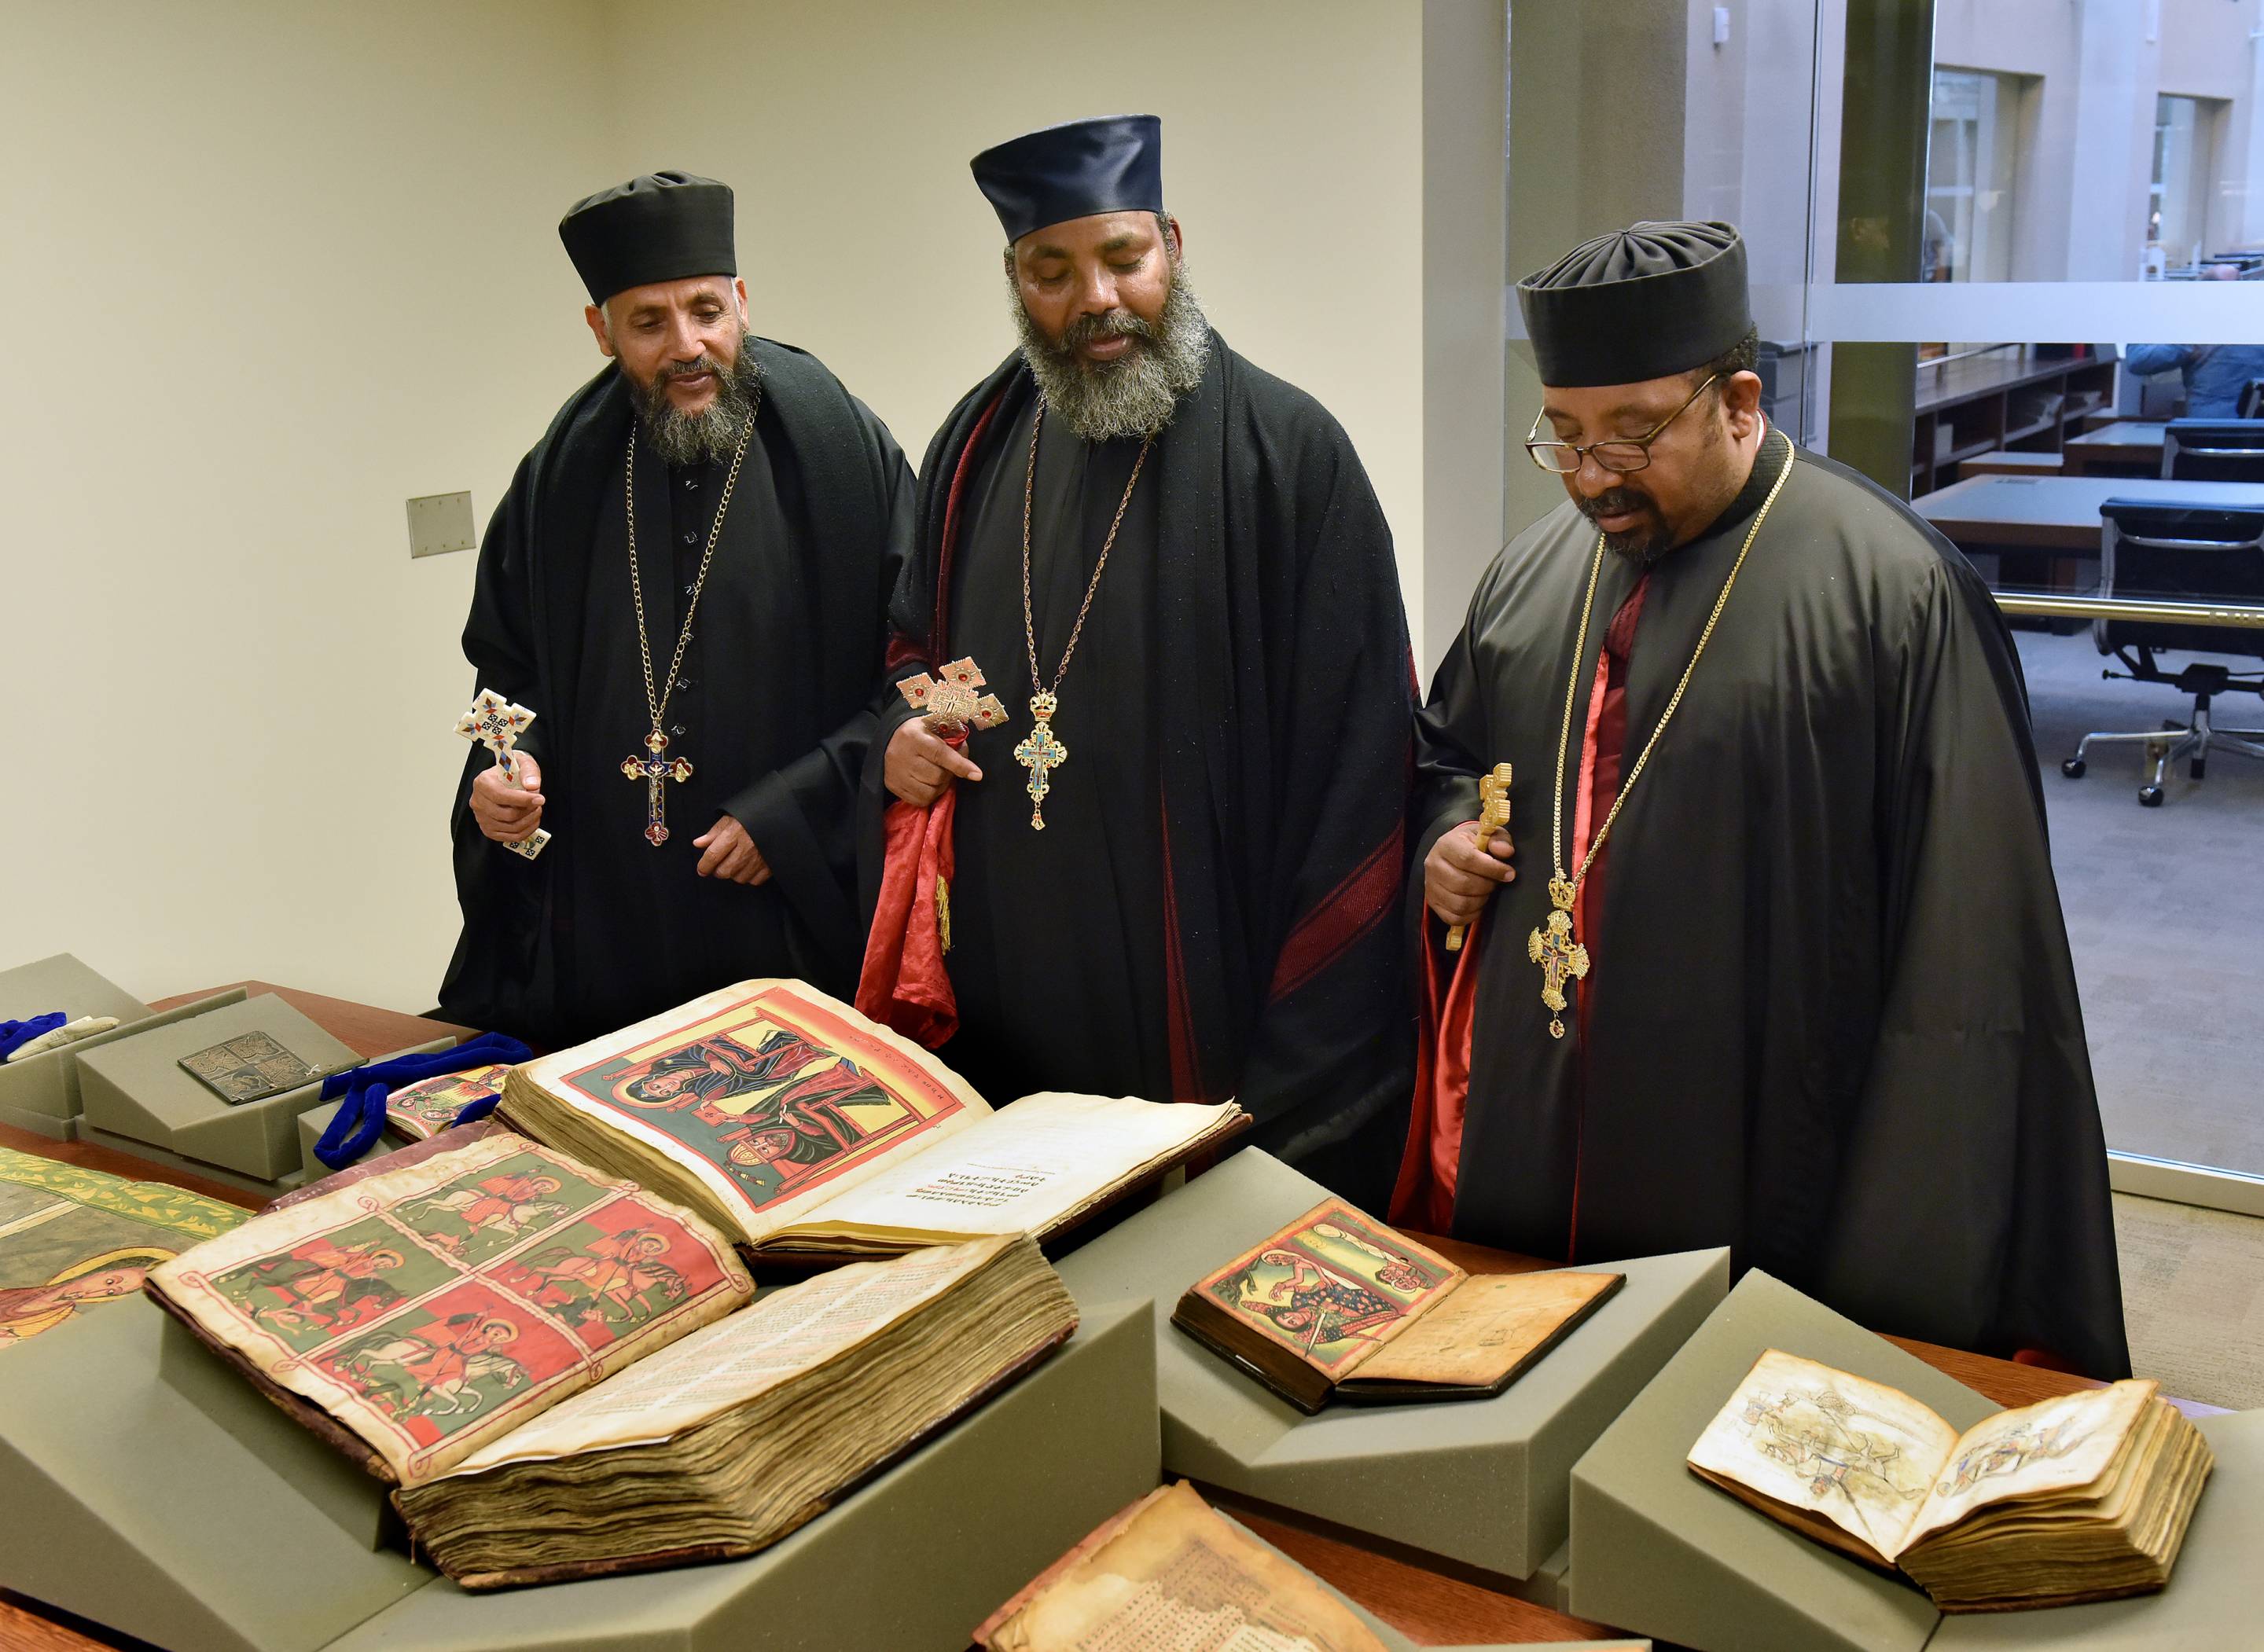 Priests view the selection of manuscripts on display.